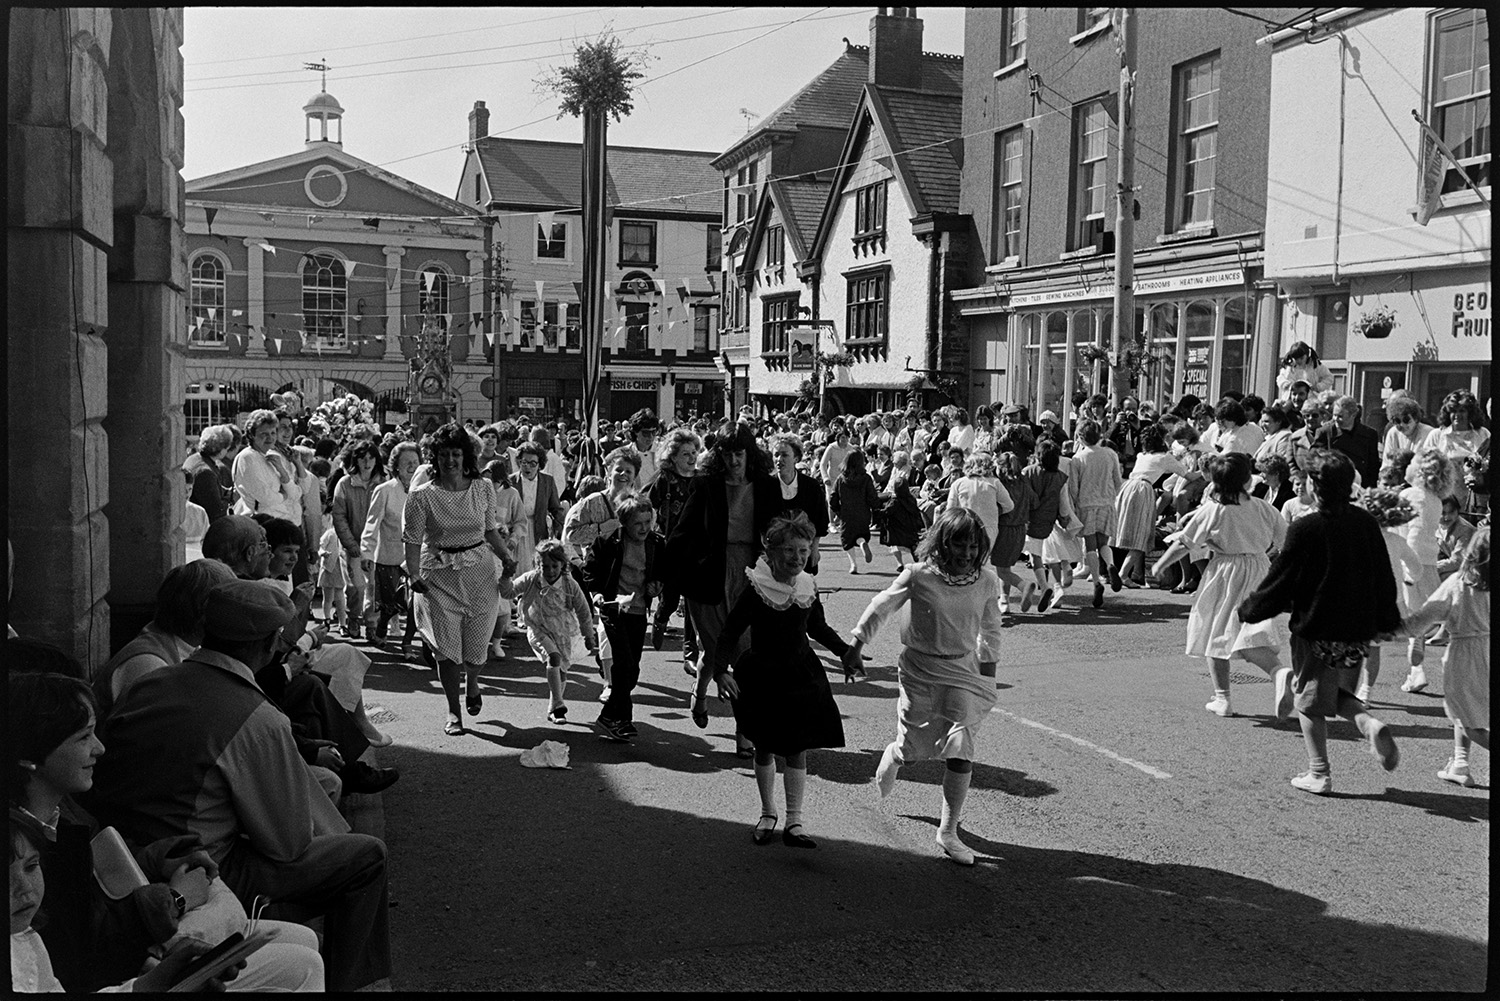 May Fair celebrations, band marching into square, children dancing. 
[Women and children dancing in the Square at Torrington May Fair. People are sat watching outside the Town Hall. The square is decorated with bunting and a maypole is visible.]